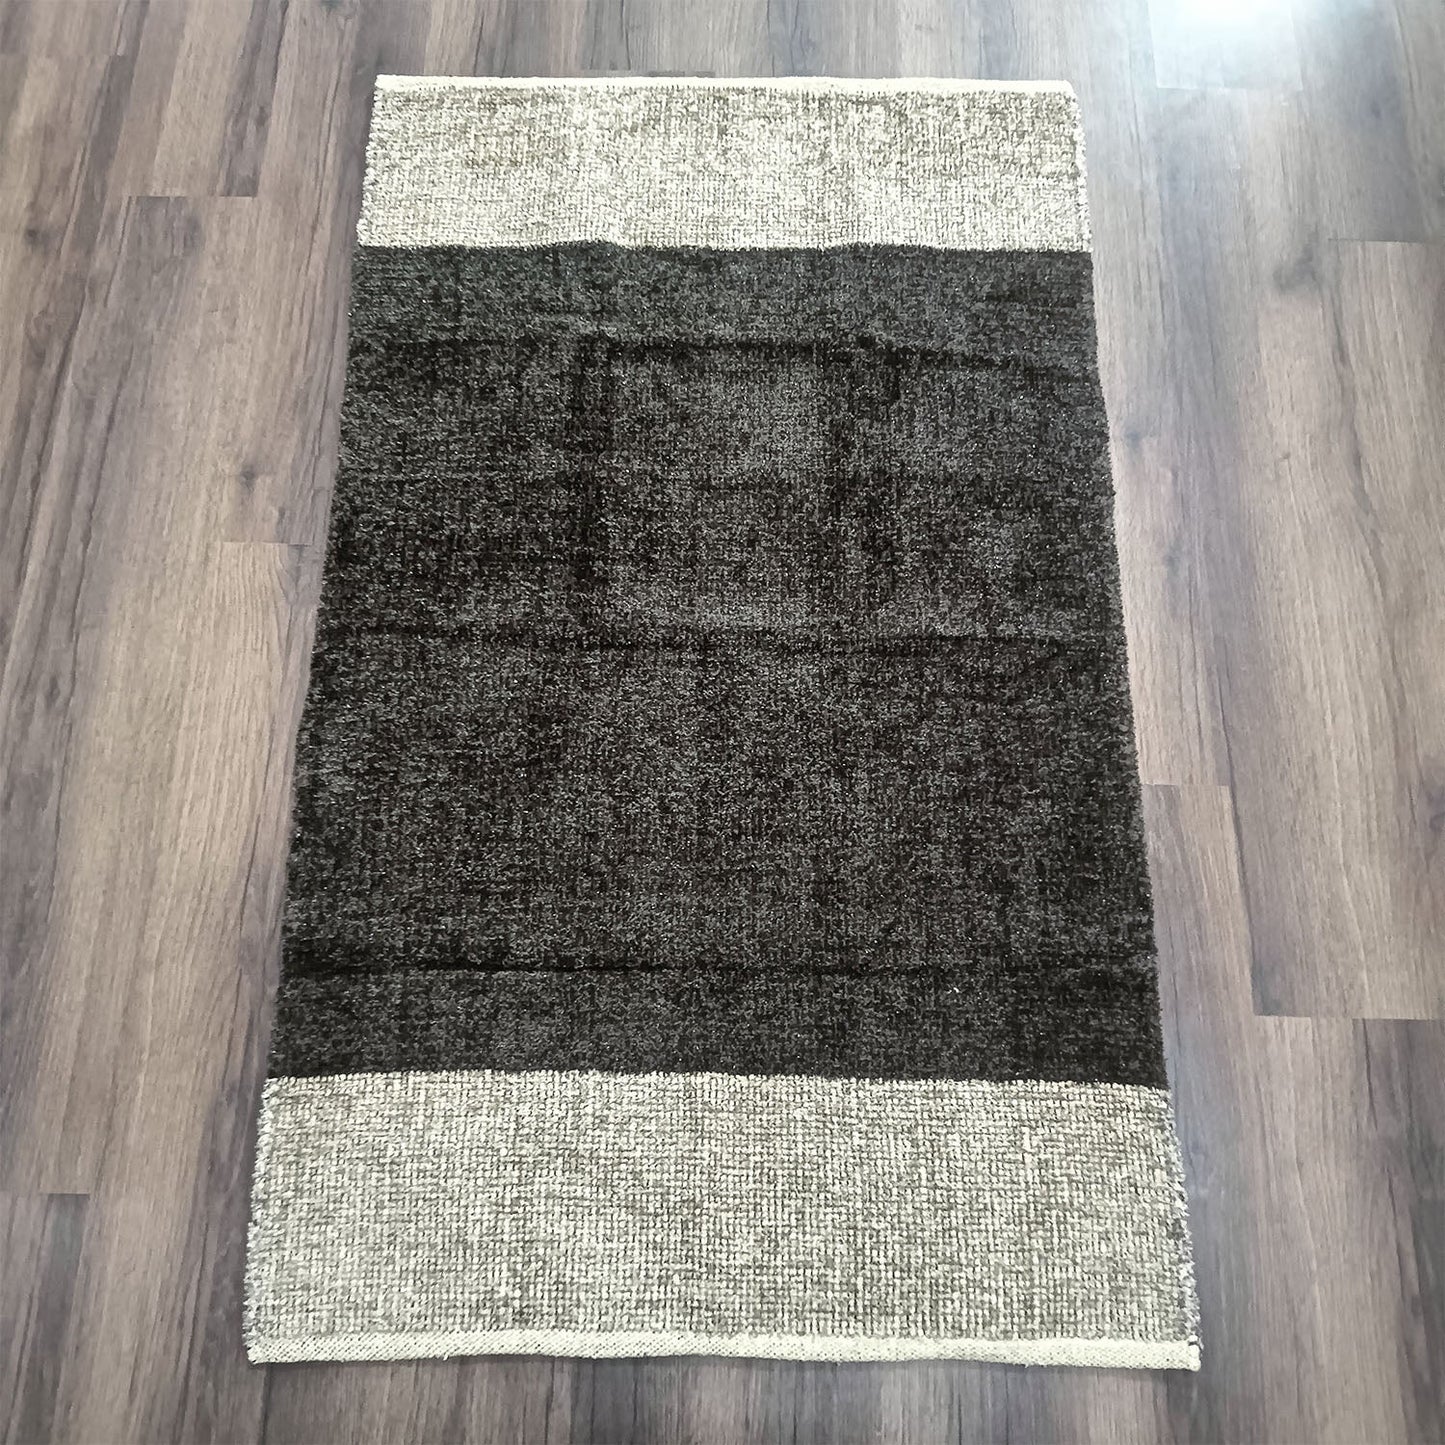 Avioni Handloom Cut Shuttle Rugs by Master Artisans | Soft Touch | Home Washable | Coffee and Beige | Reversible - 3 feet x 5 feet (~90 cm x 150 cm)